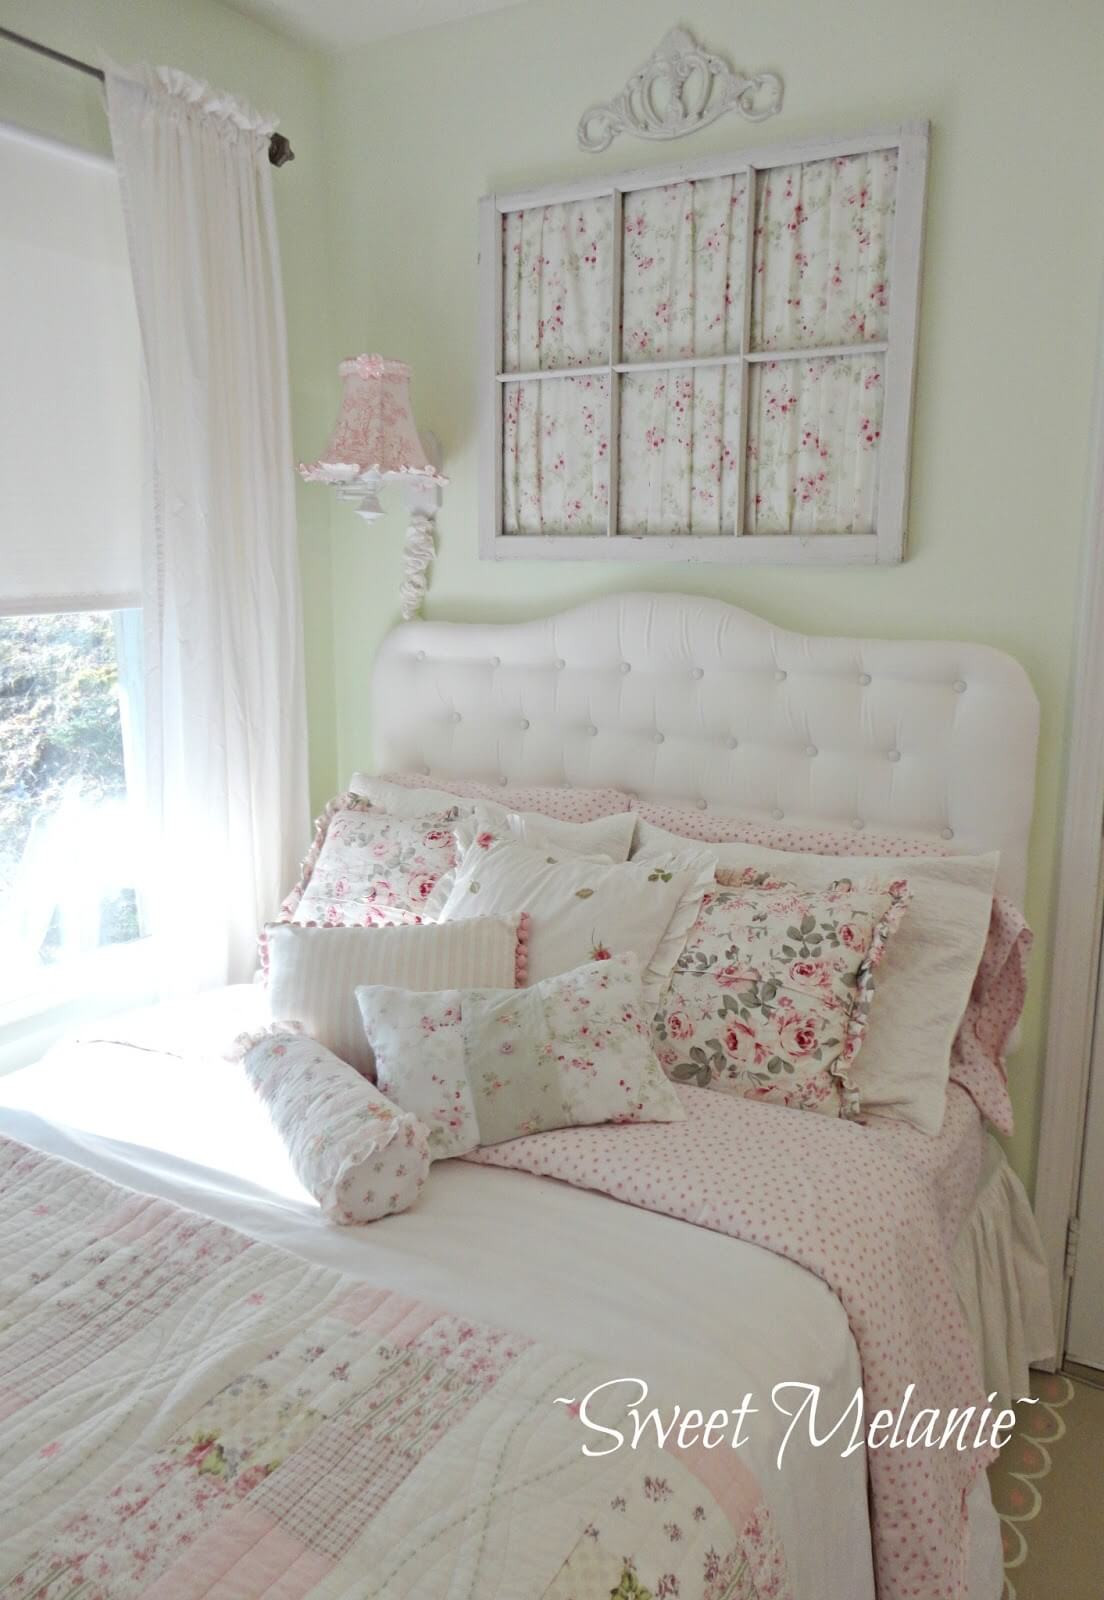 Pink Shabby Chic Bedroom
 35 Best Shabby Chic Bedroom Design and Decor Ideas for 2017